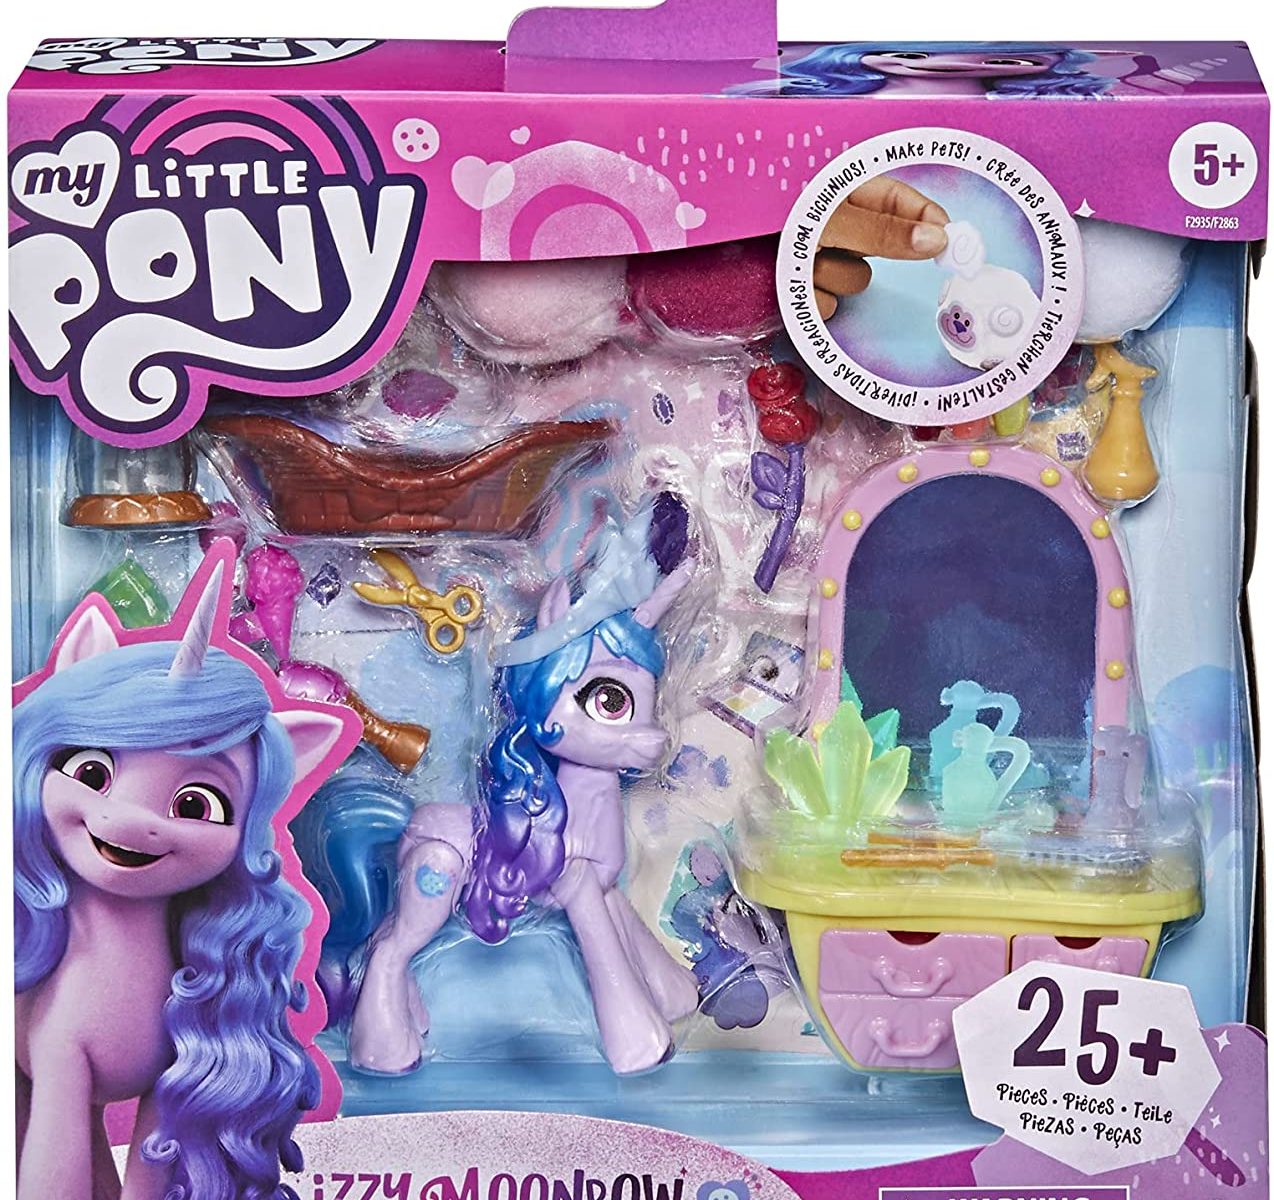 MLP: ANG Izzy Moonbow Story Scenes Critter Creation Figure Set 1